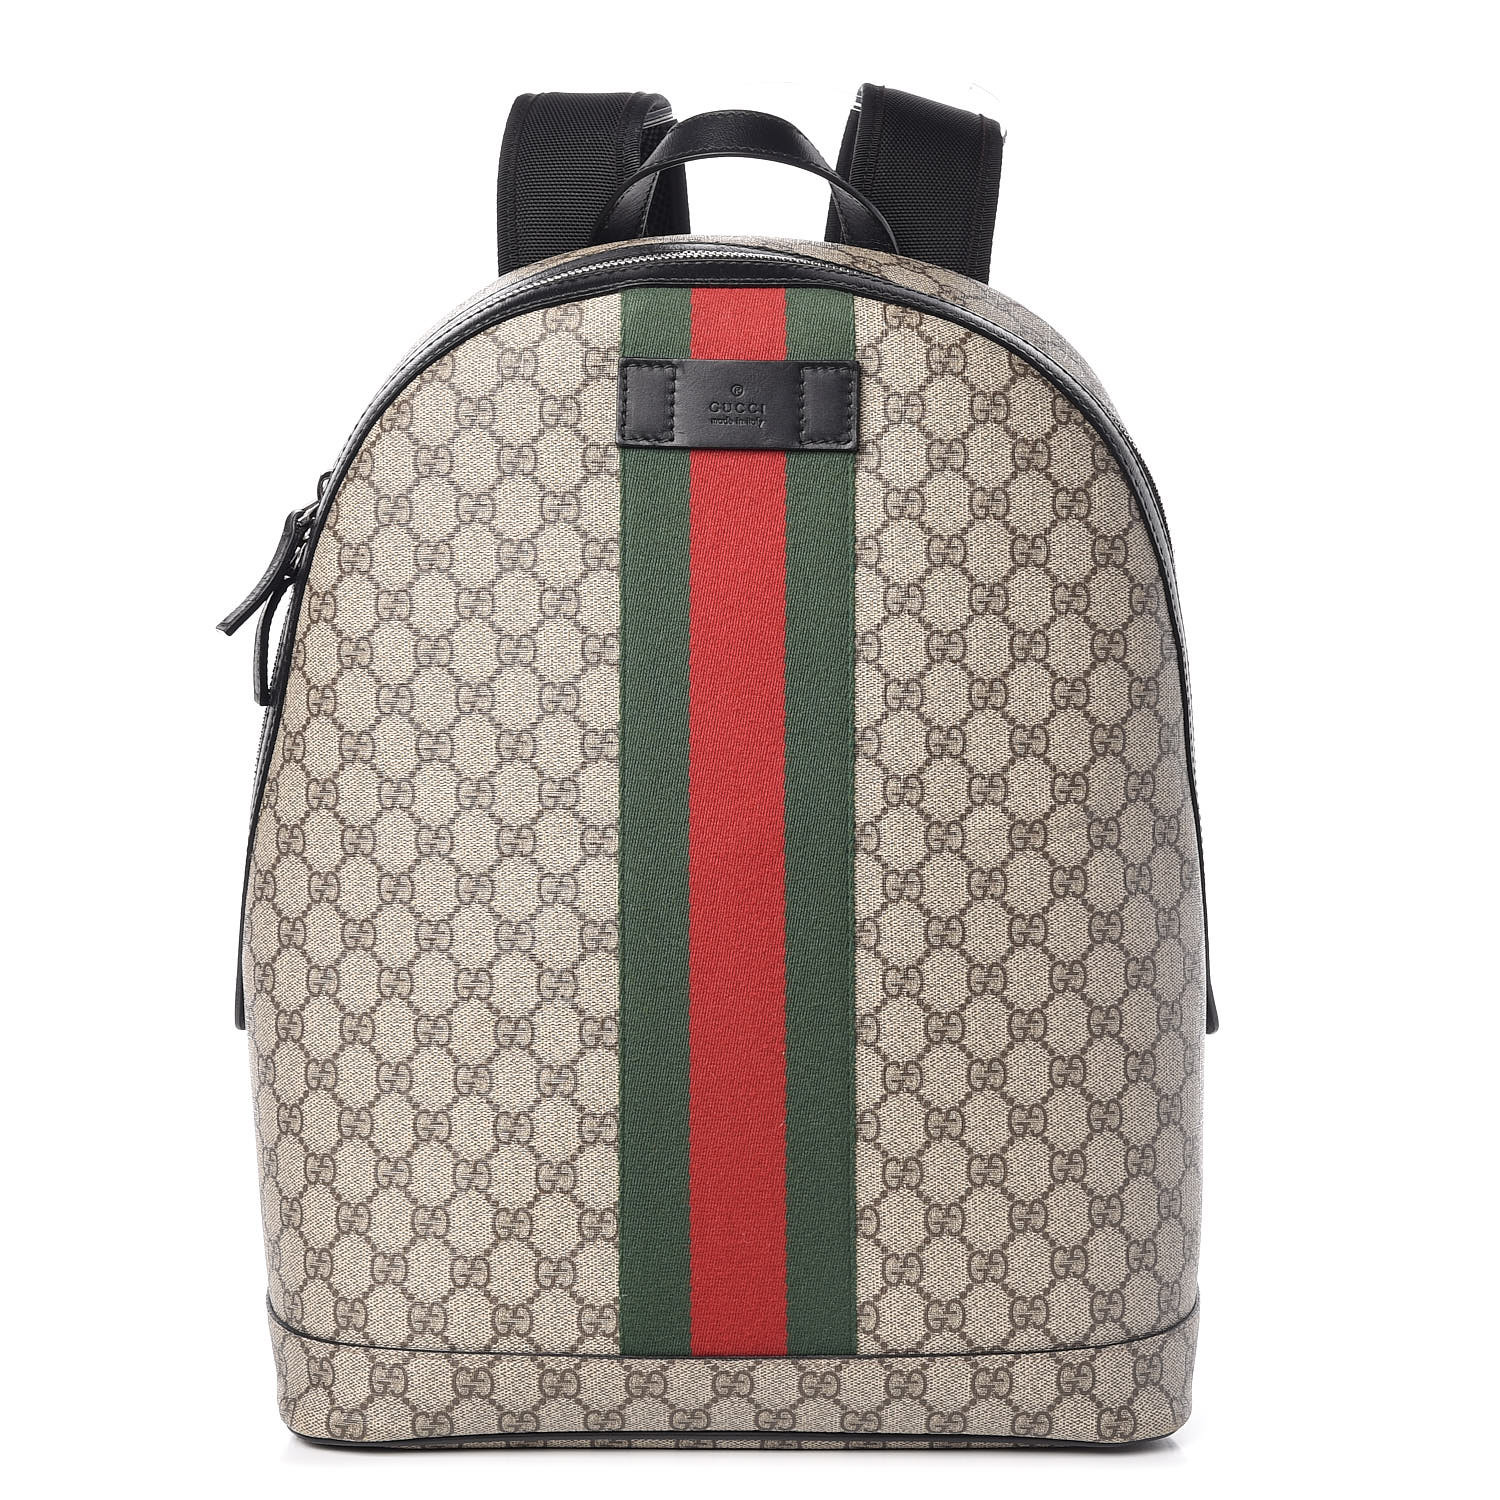 Gg Supreme Backpack With Web Best Sale, 54% OFF 